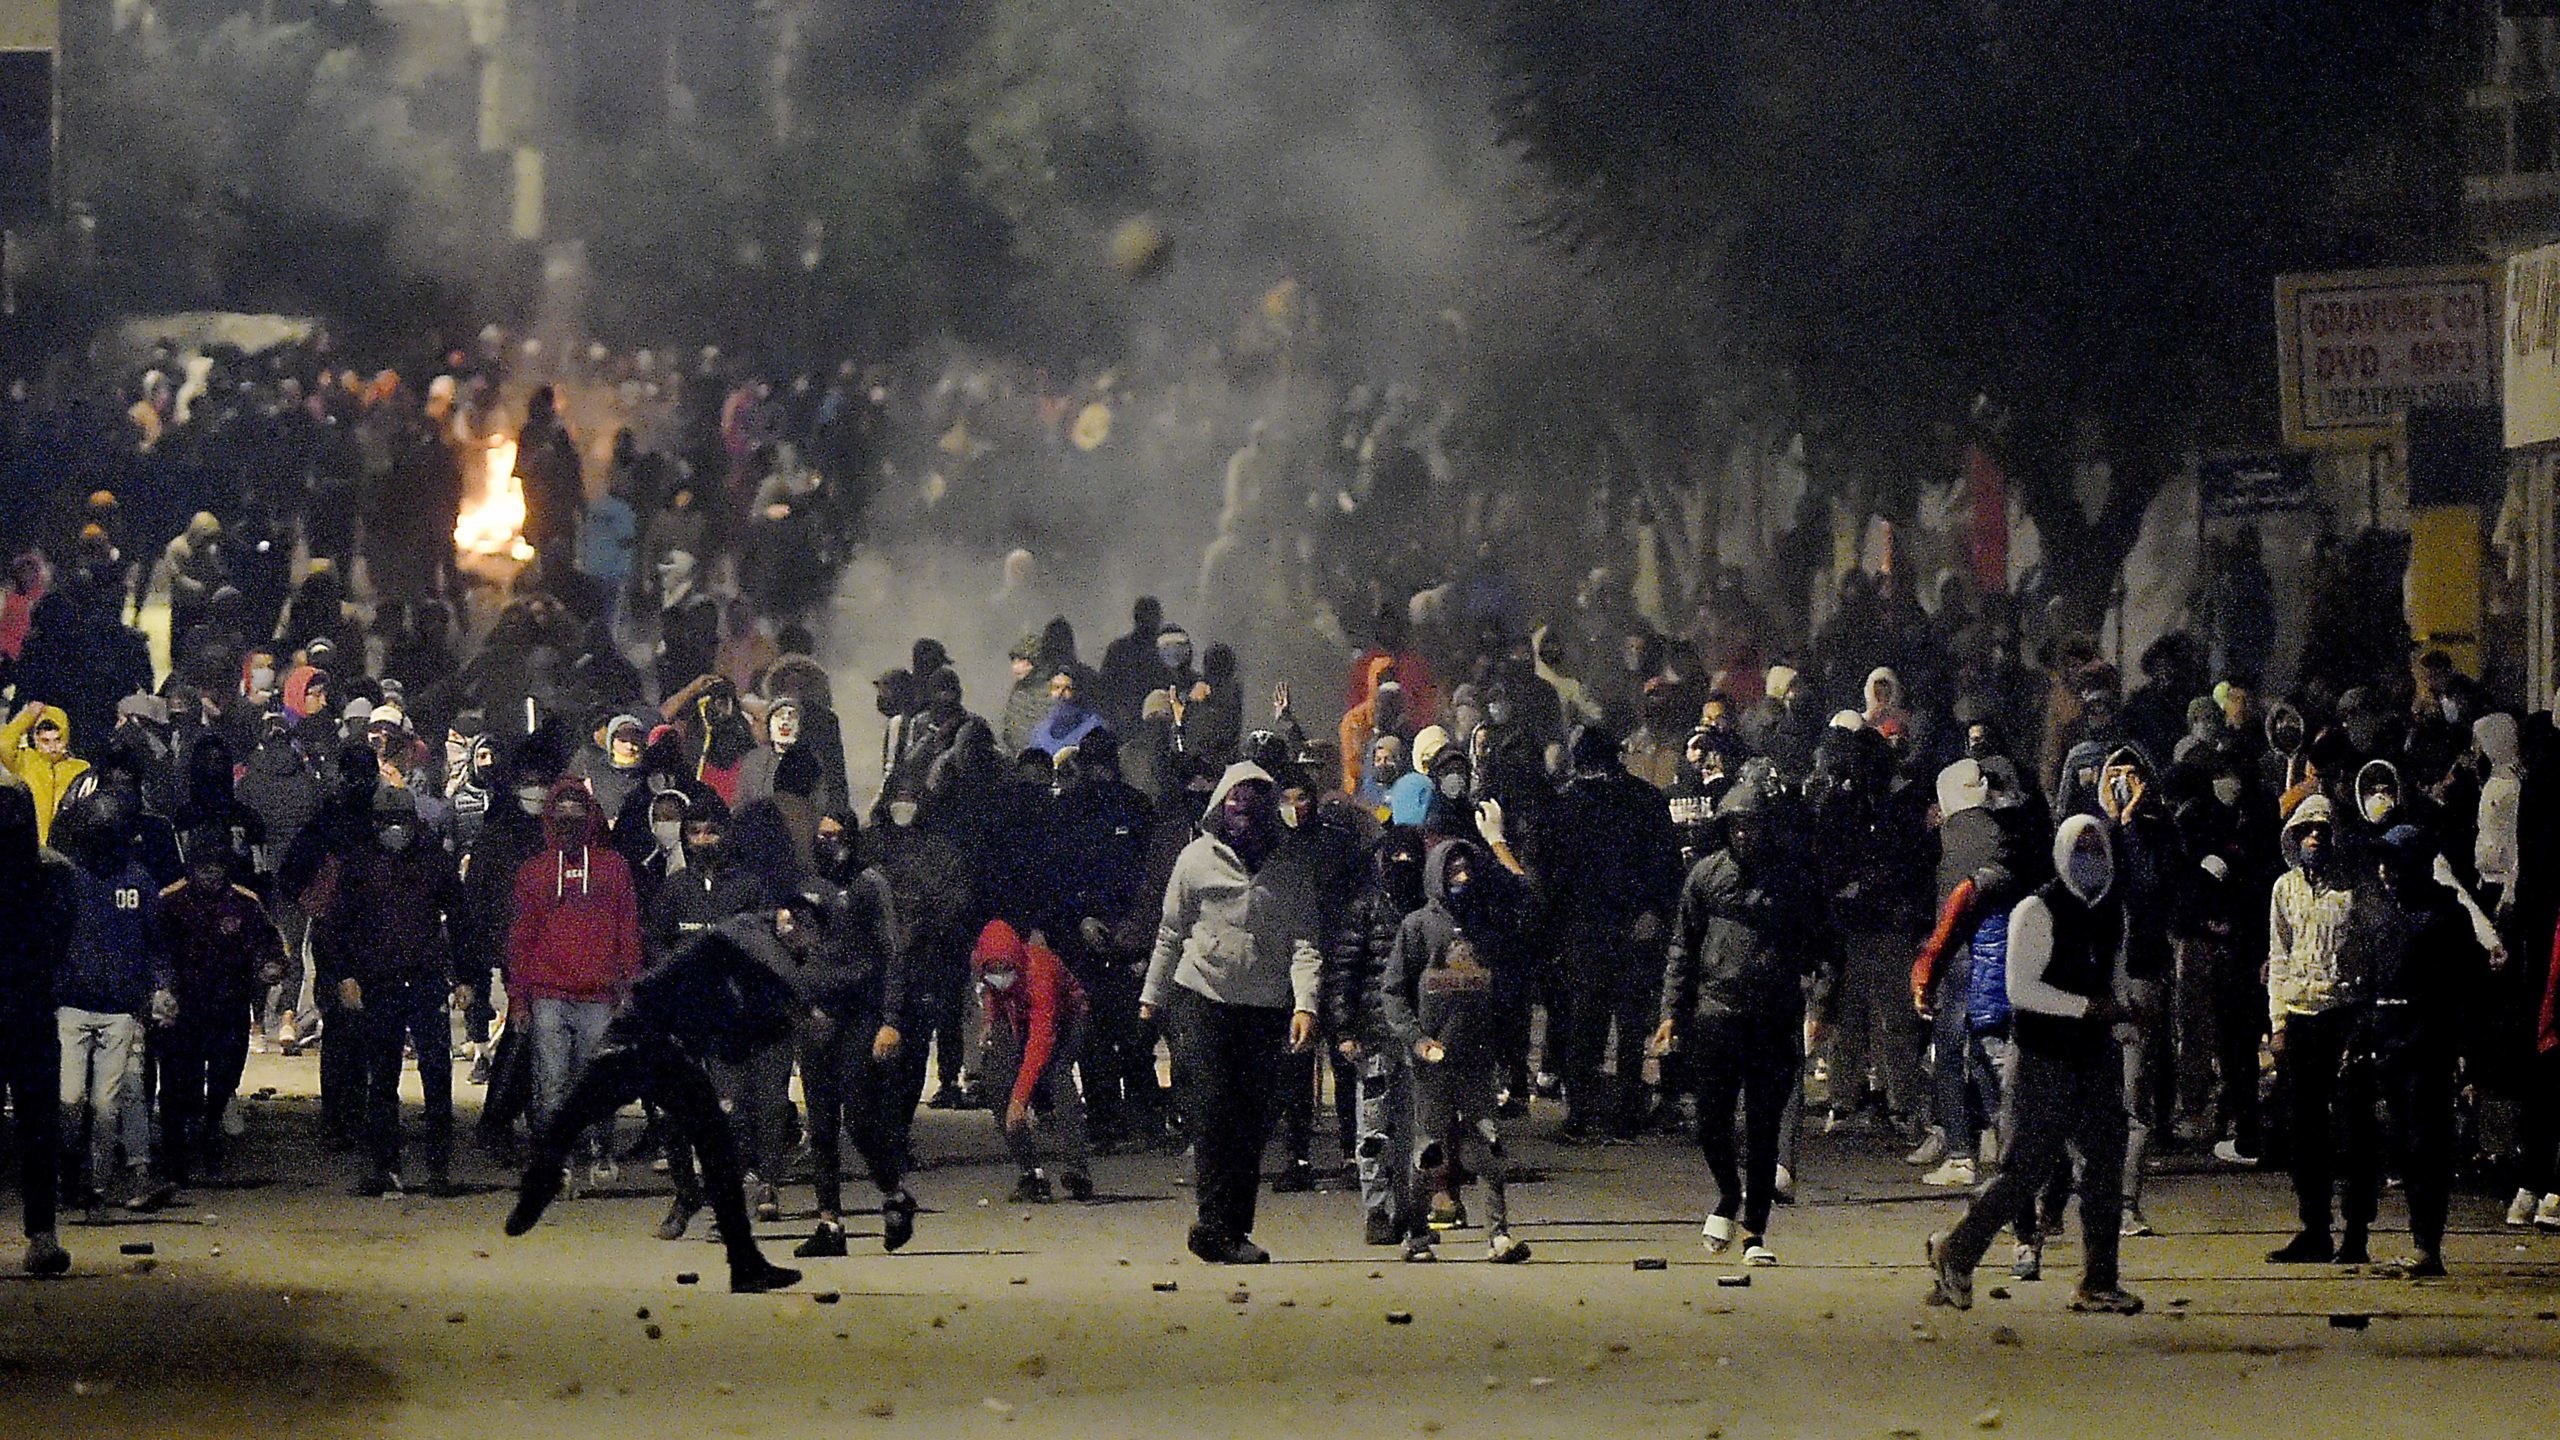 Violent Clashes Increase in Tunisia After Death of Protester